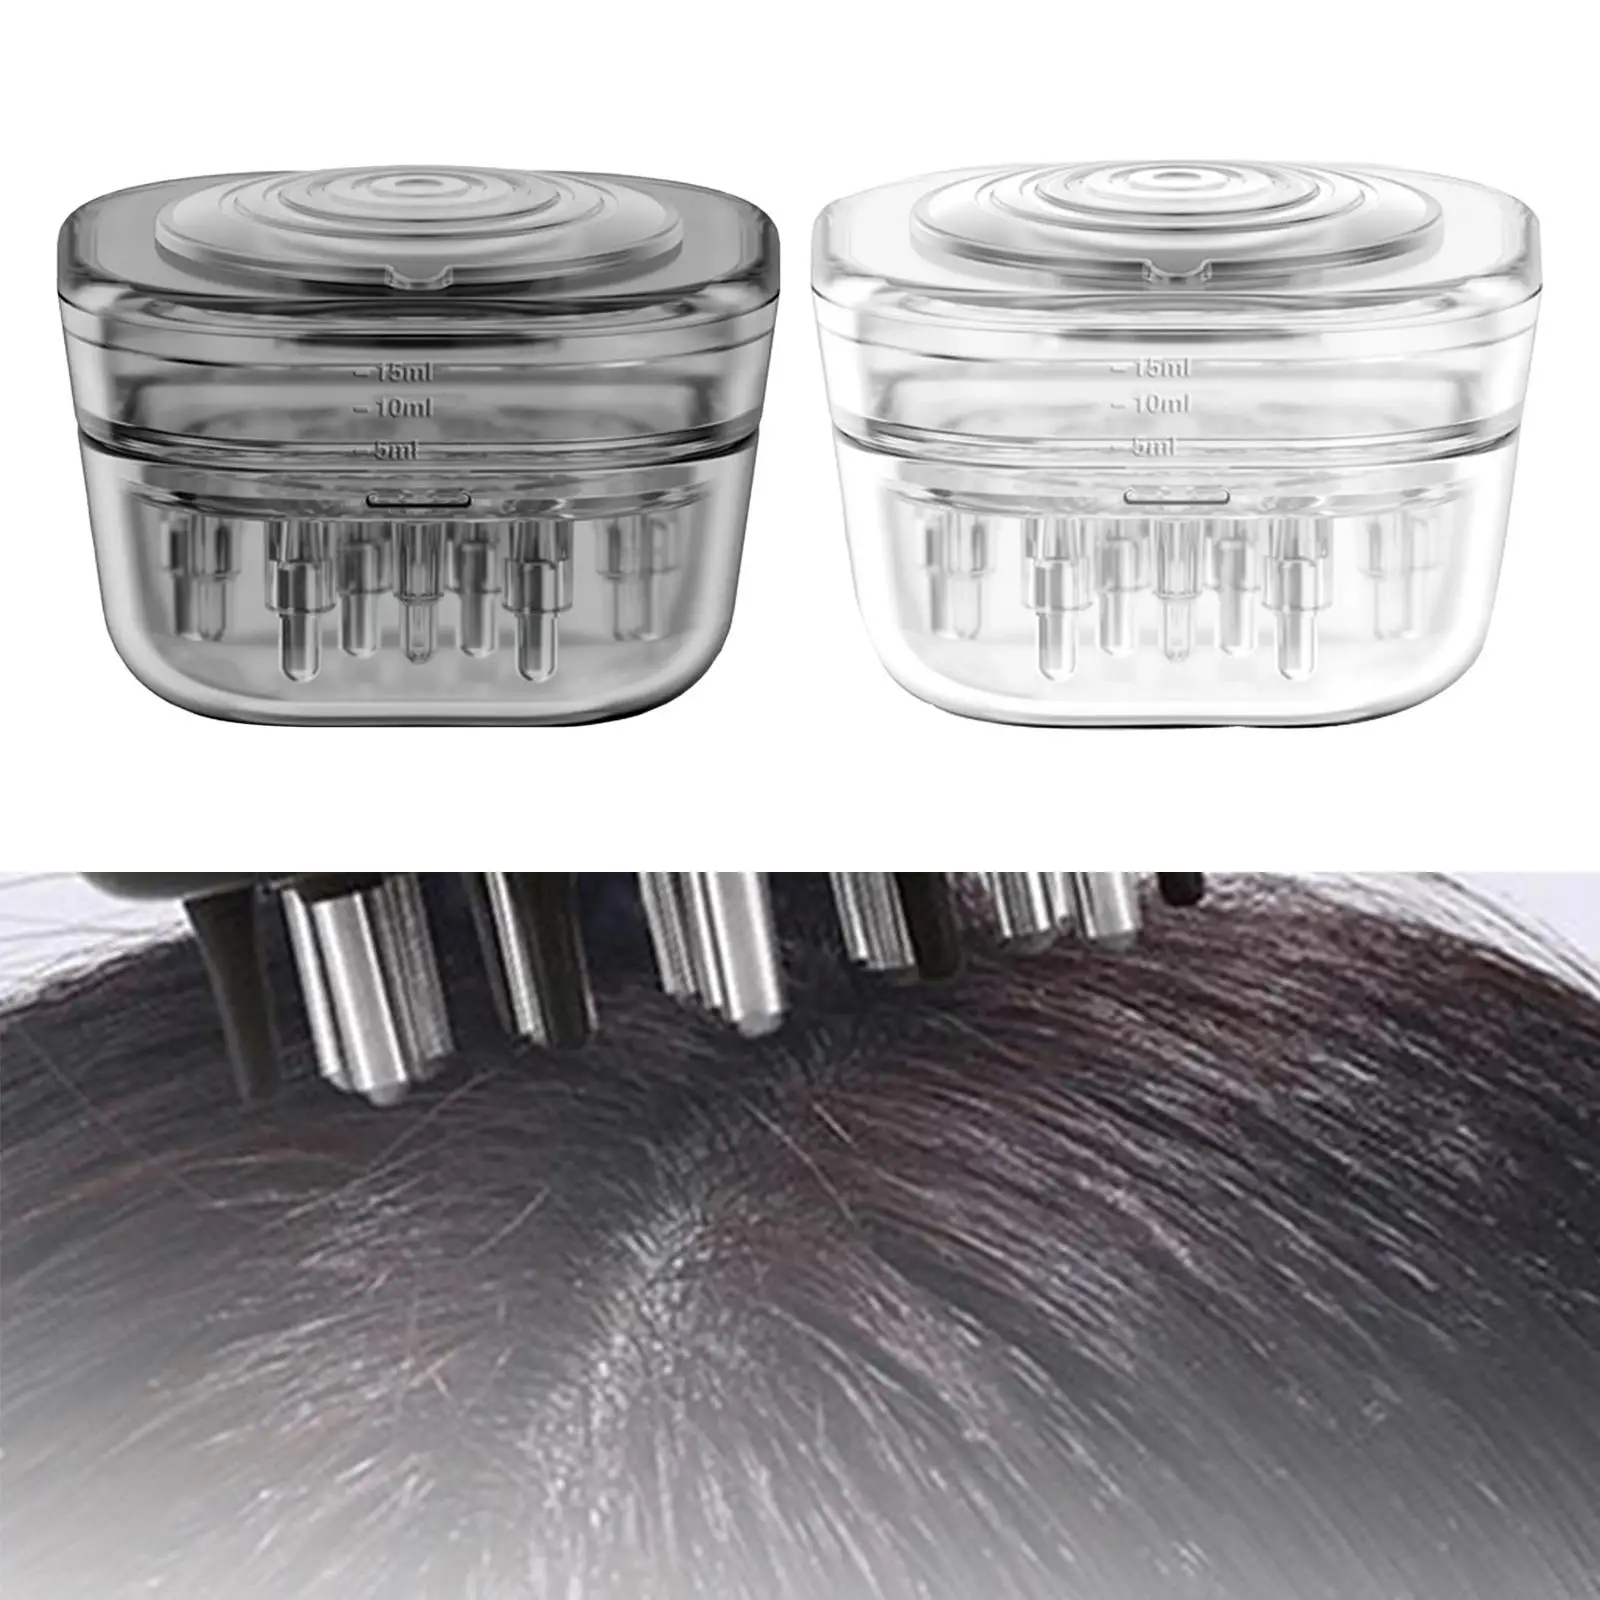 Compact Scalp Applicator Comb Rolling Ball Hair Applicator for Essential Oil Hair Oil